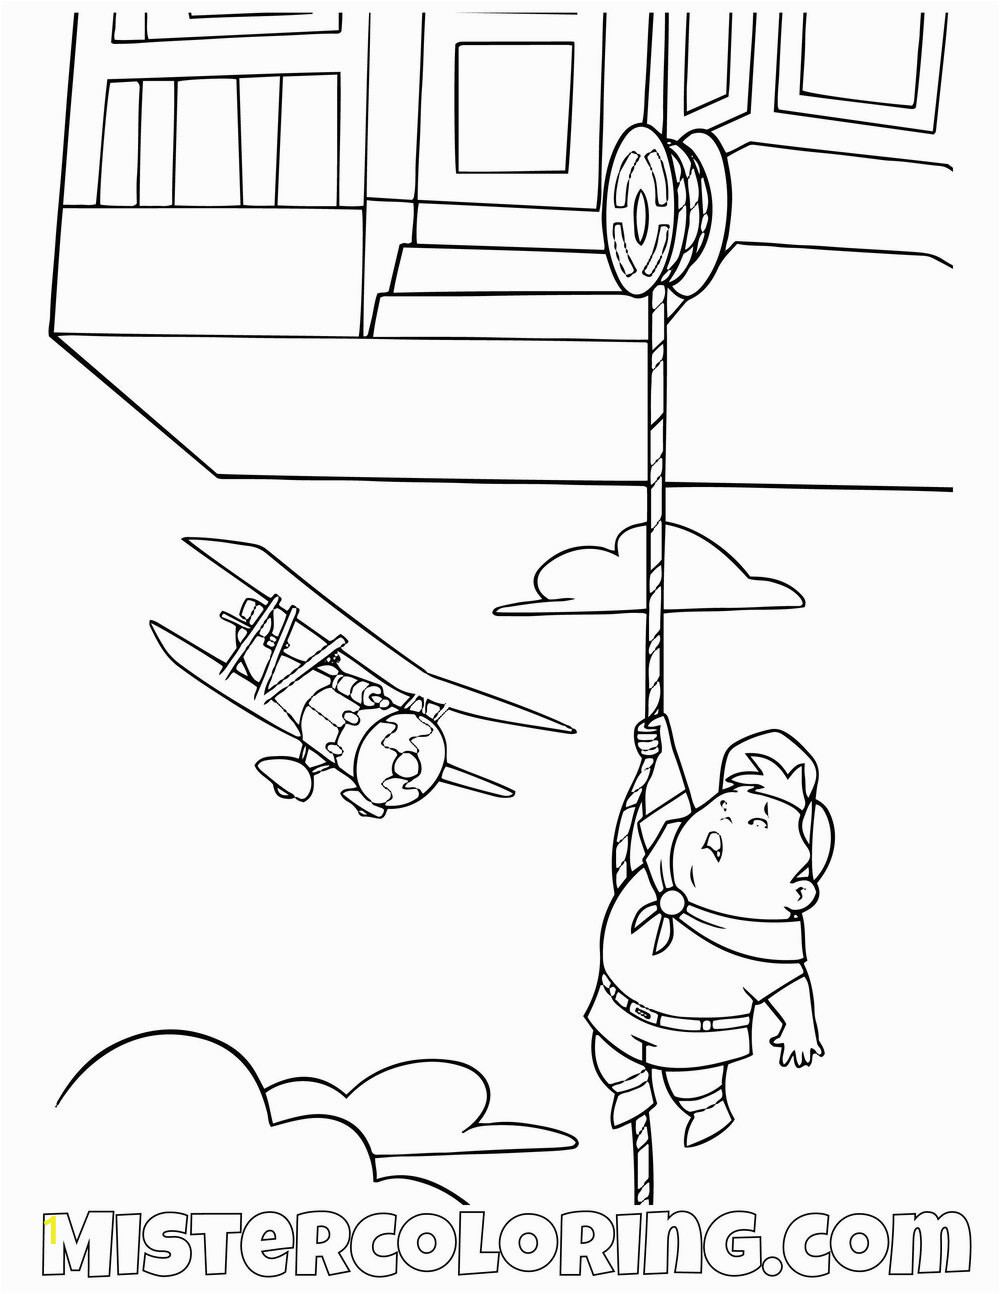 Russell Hanging Disney Pixar Up Movie Coloring Pages For Kids